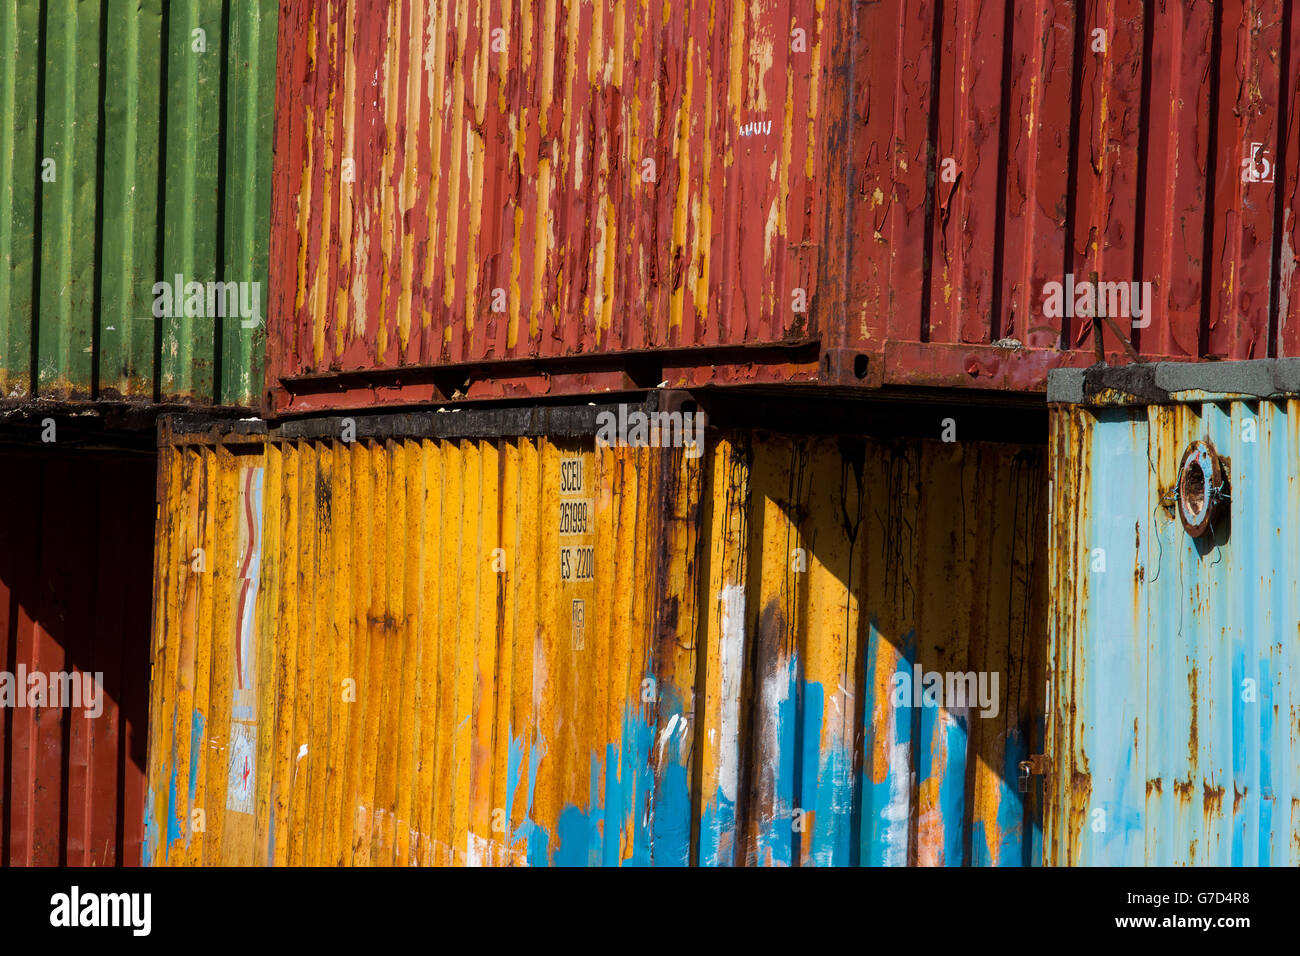 Old containers Stock Photo